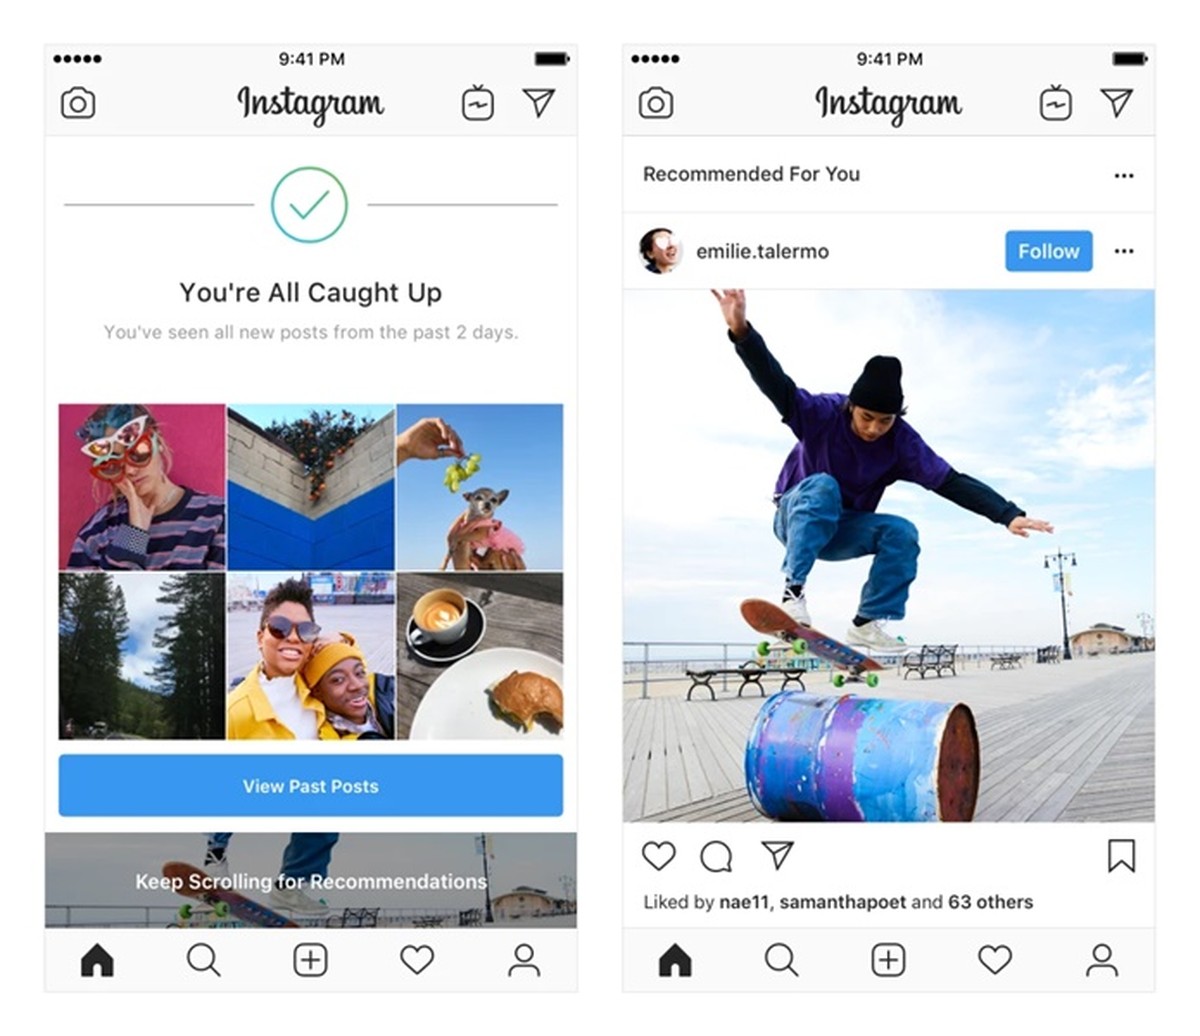 Instagram tests recommendation of posts in the feed | Social networks